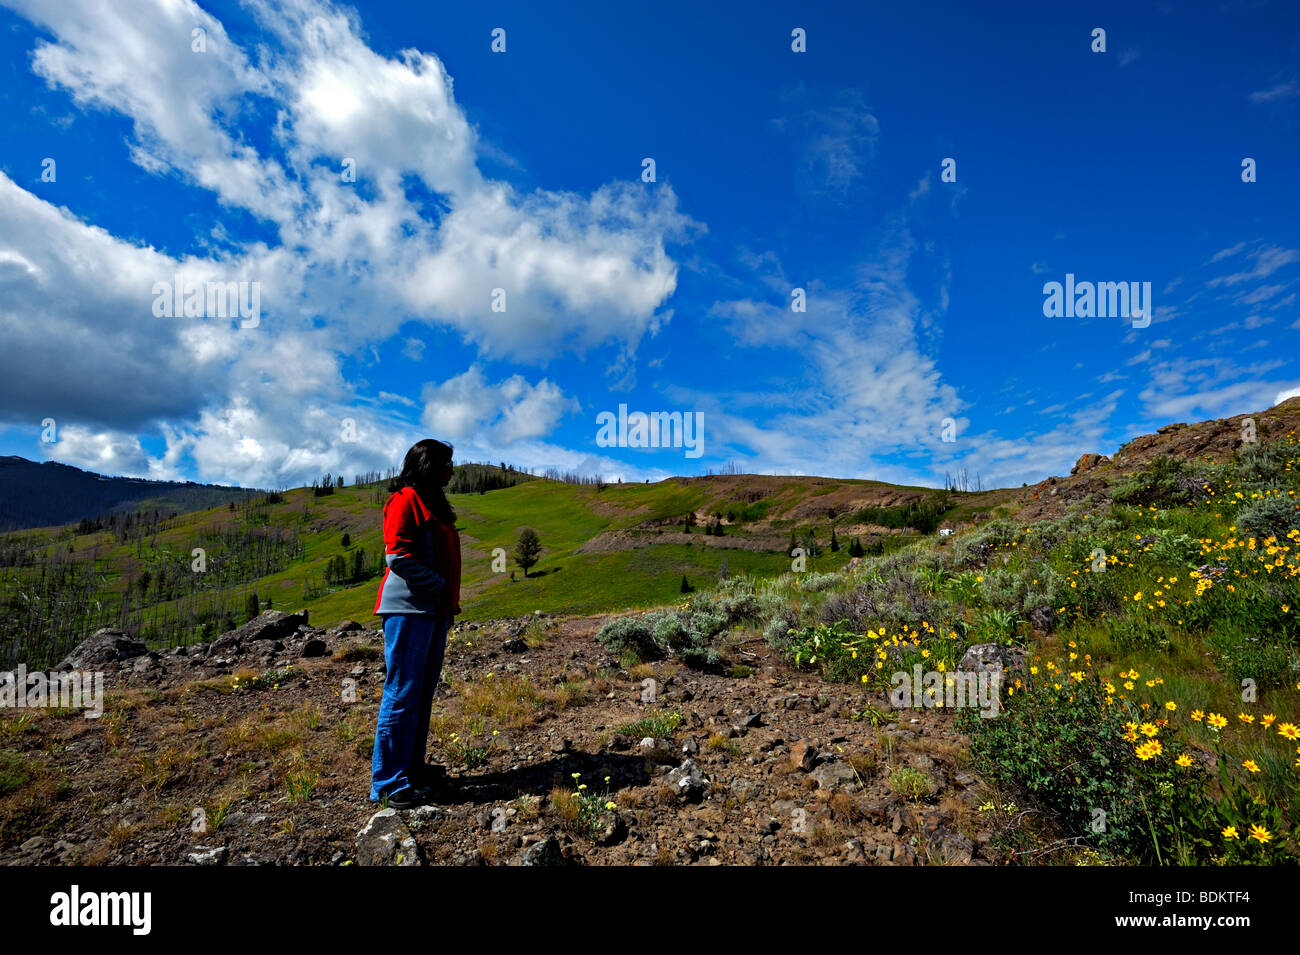 A tourist in the Lamar valley in Yellowstone national park Stock Photo